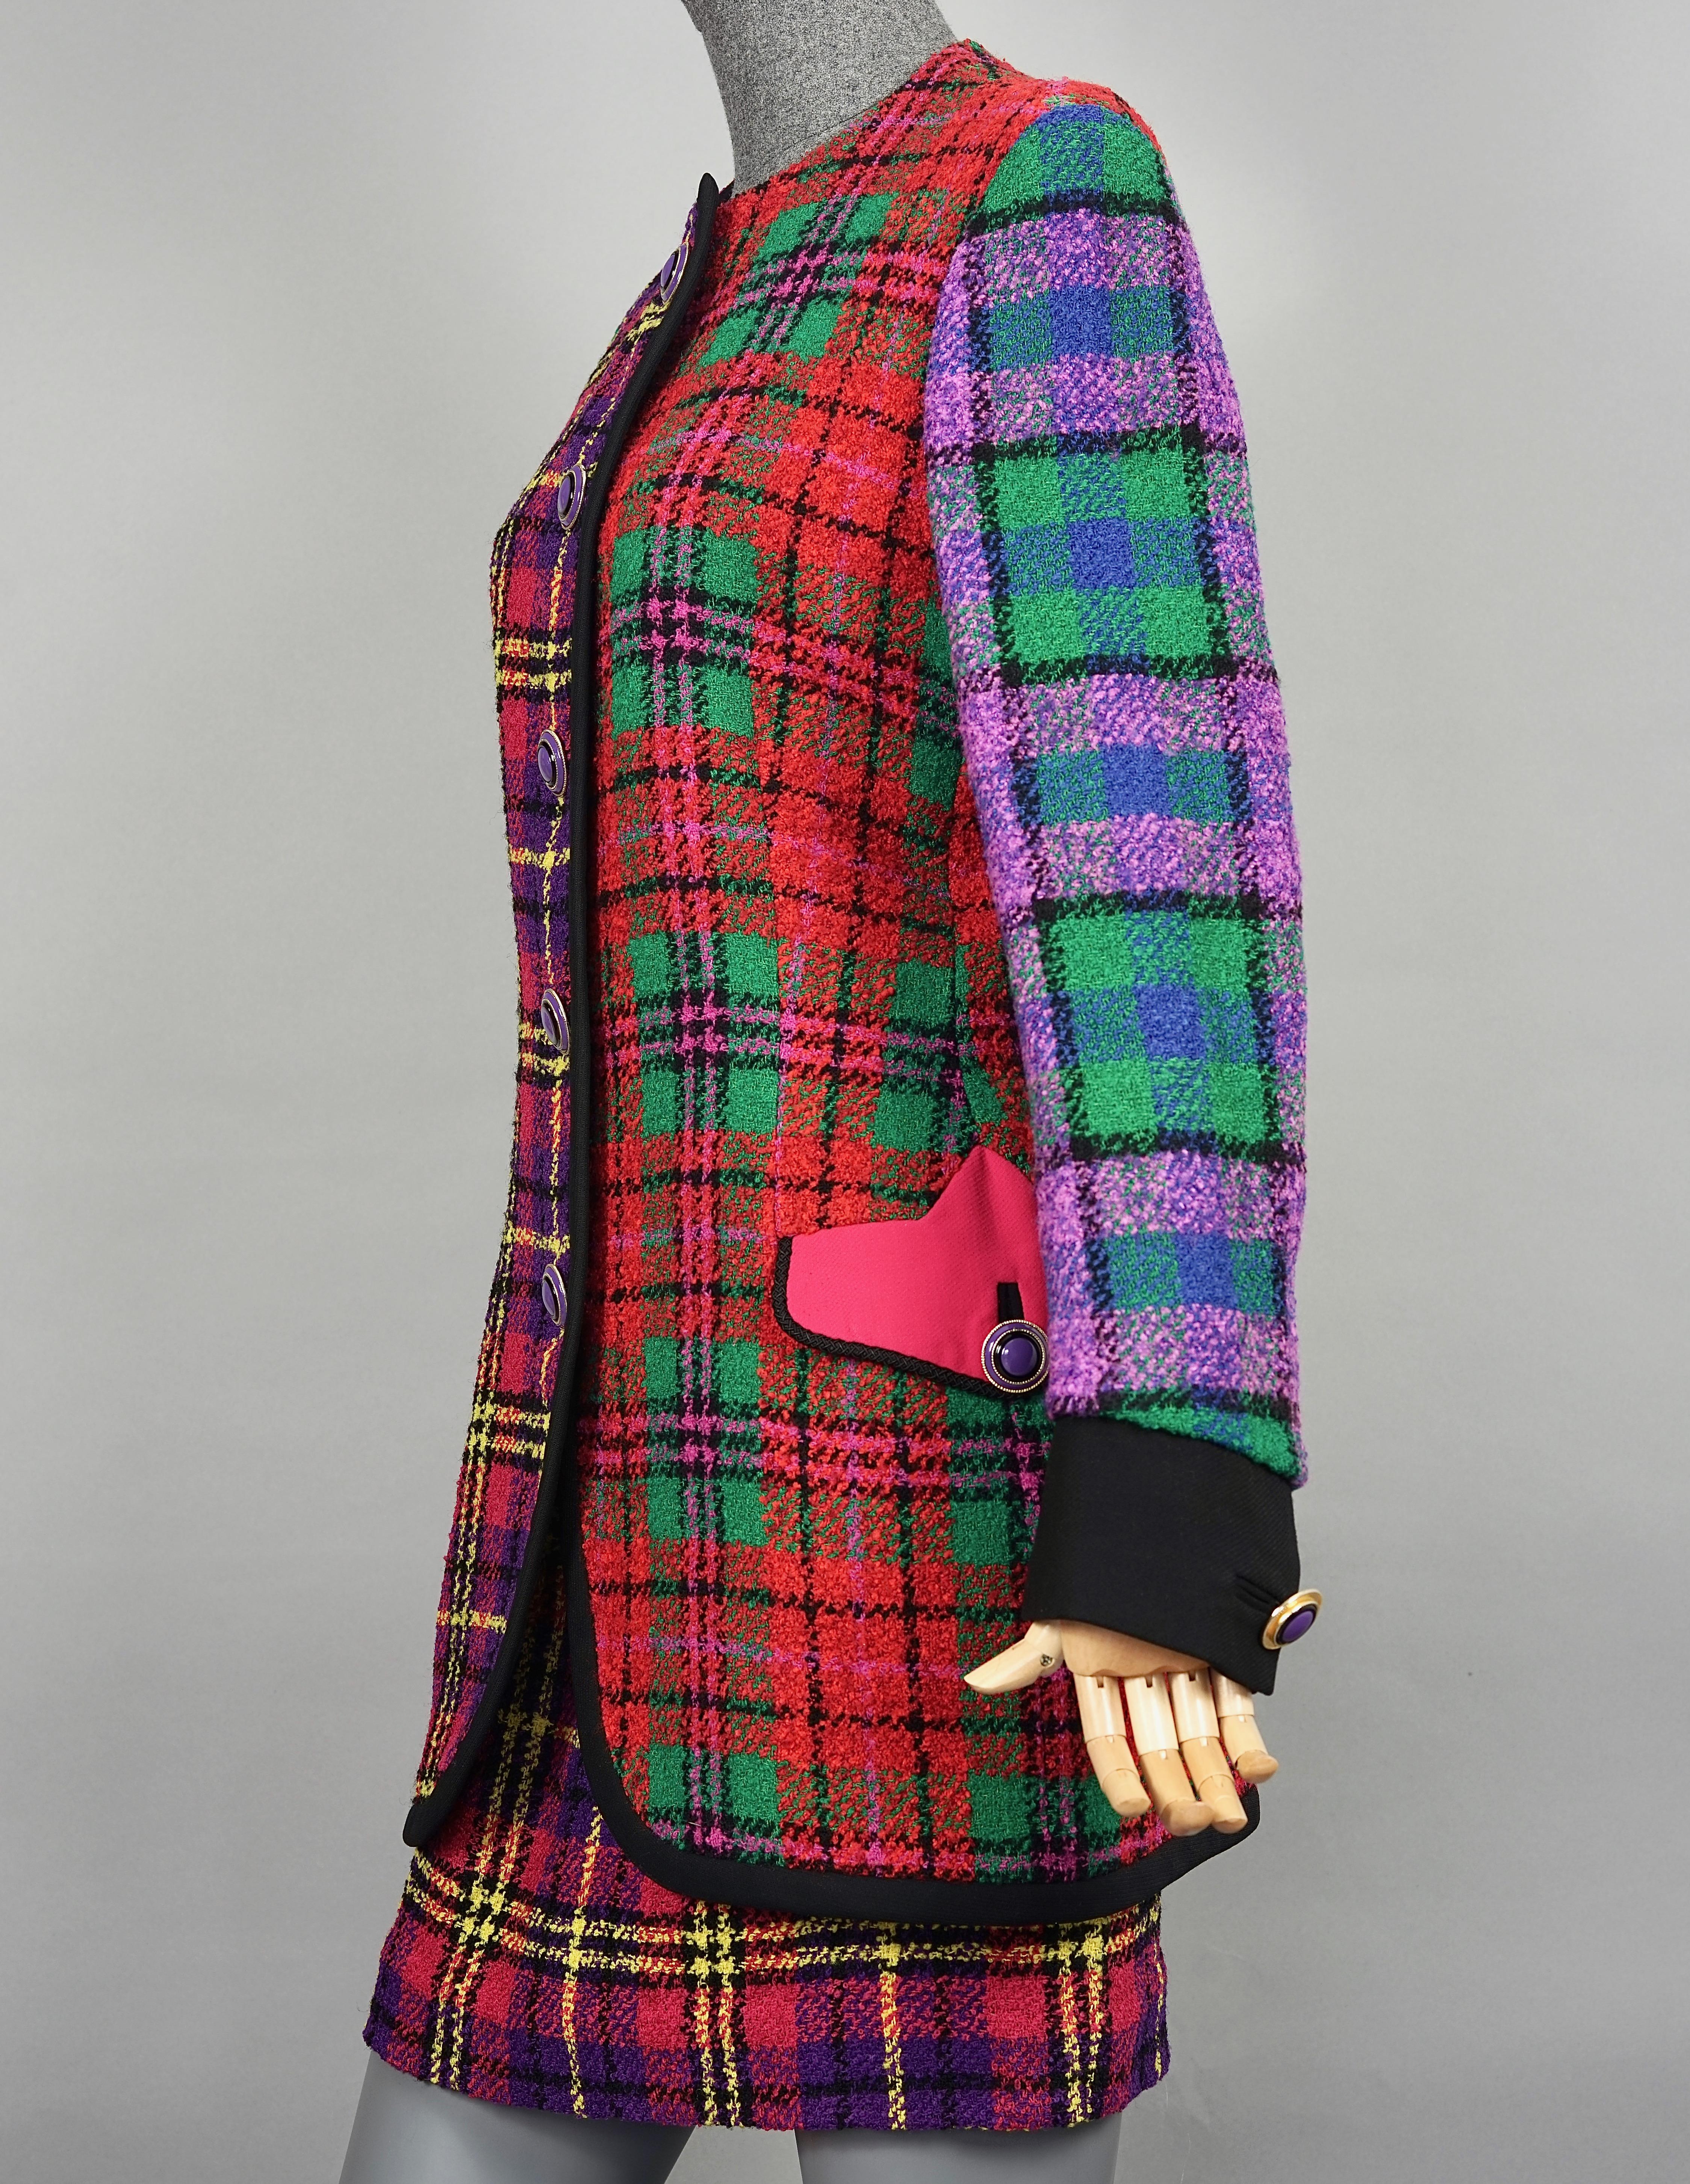 Vintage 1991 A/W GIANNI VERSACE Couture Plaid Tartan Patchwork Jacket Skirt Suit In Excellent Condition For Sale In Kingersheim, Alsace